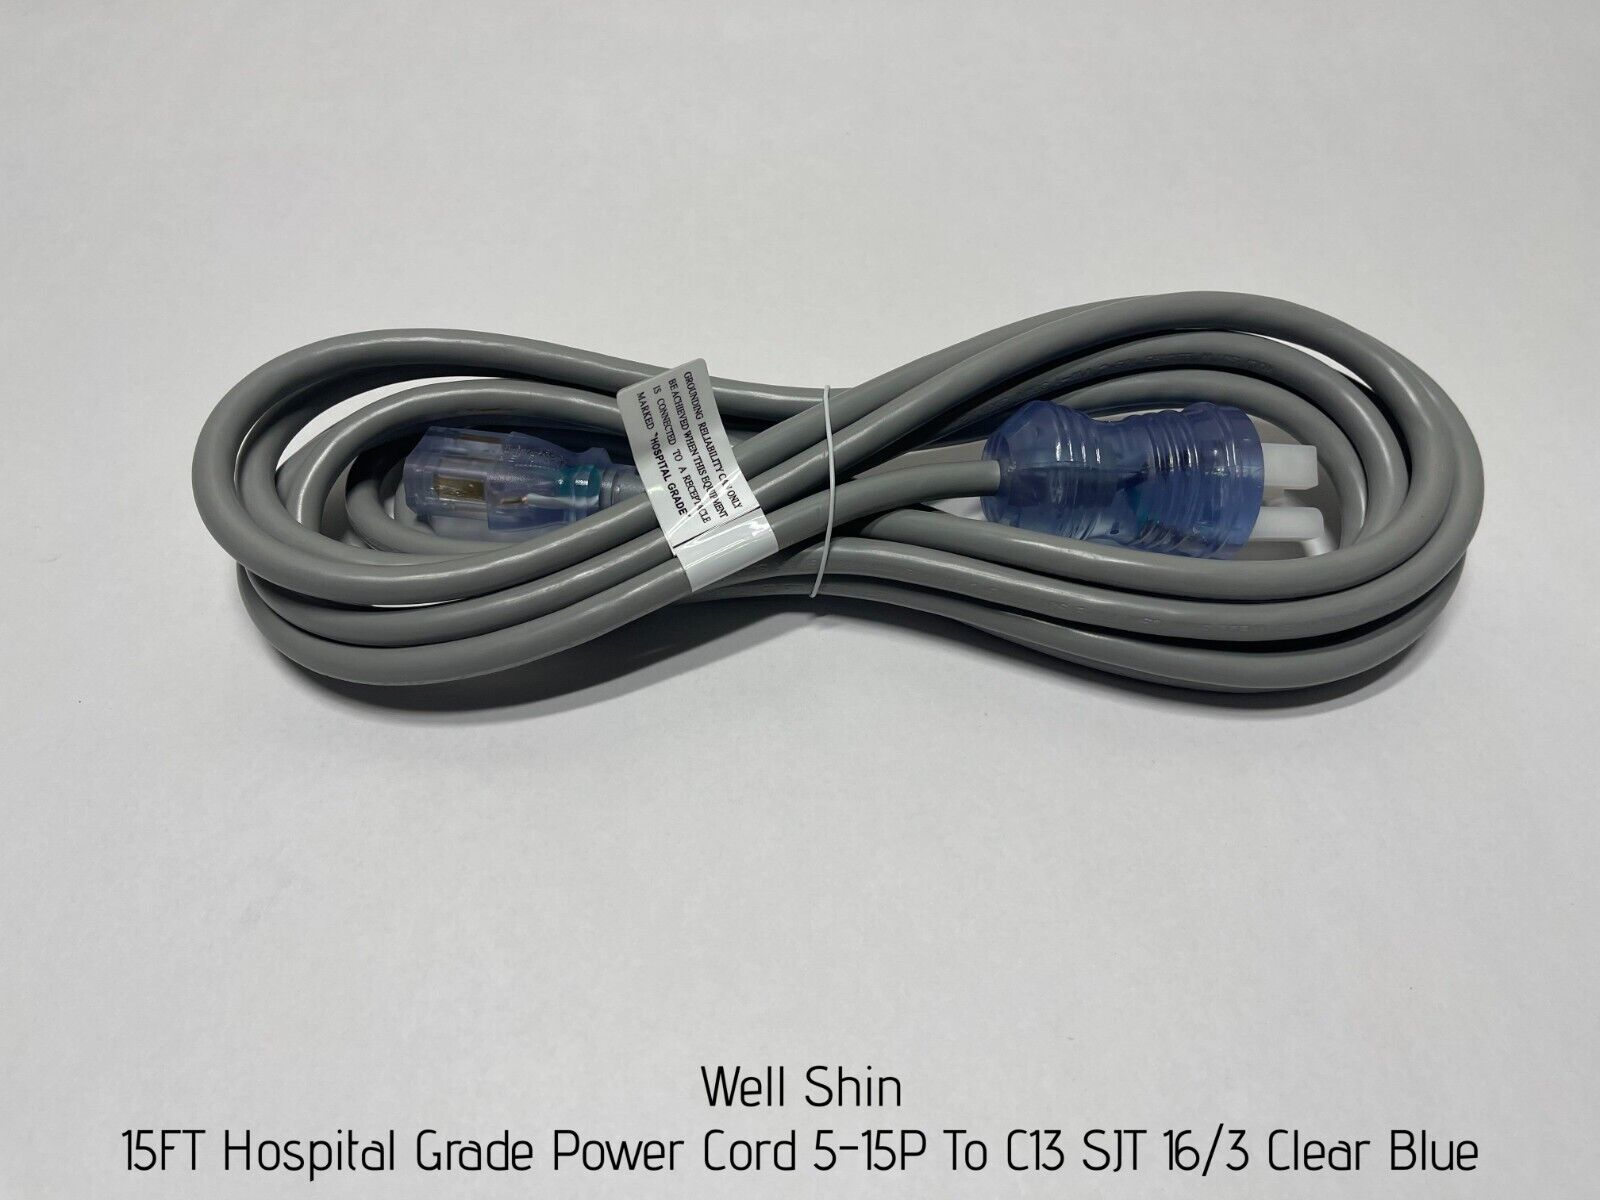 Well Shin 15FT Hospital Grade Power Cord 5-15P To C13 SJT 16/3 Clear Blue